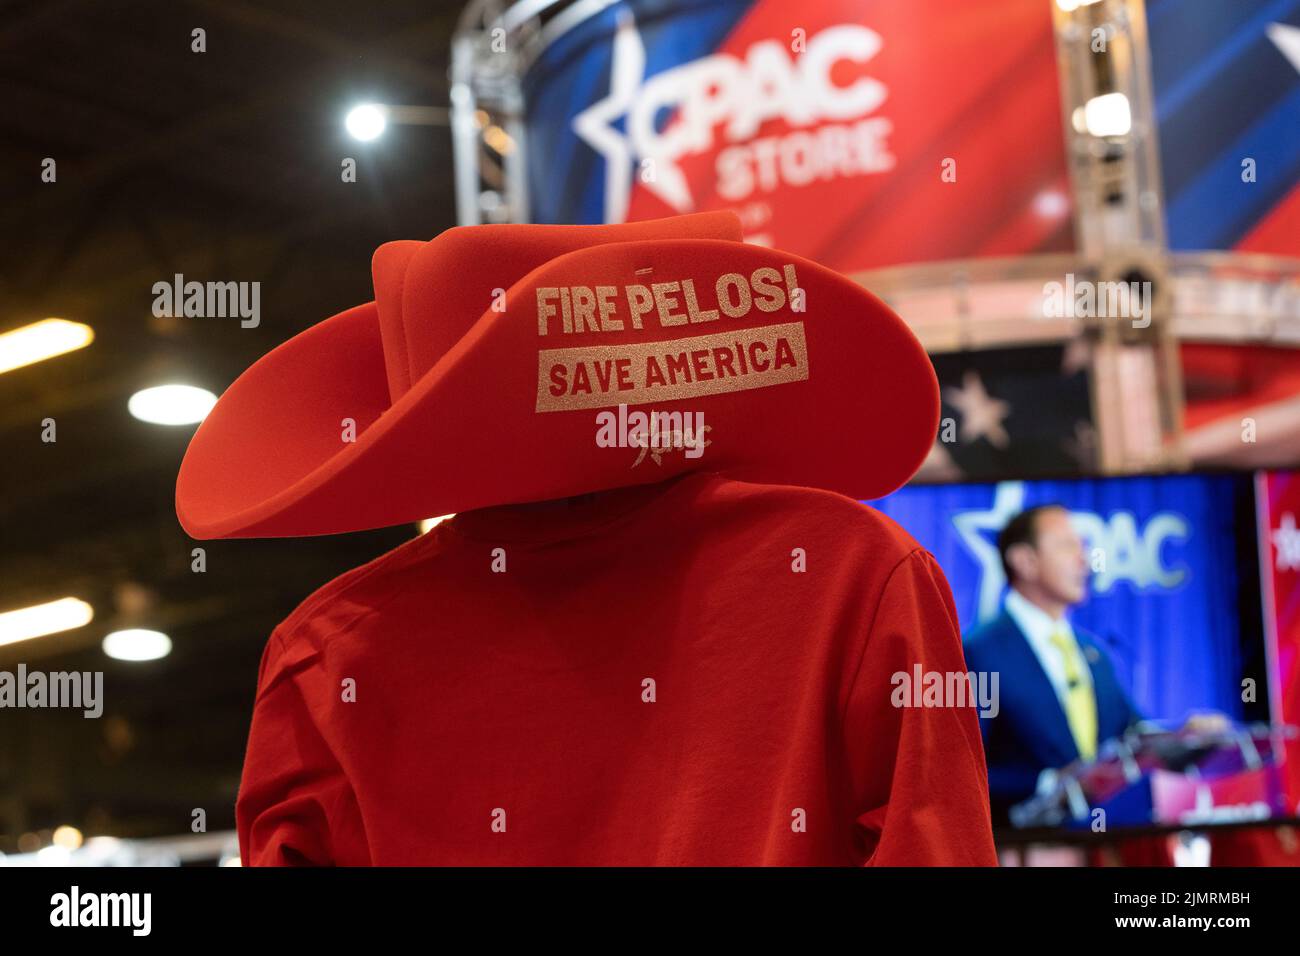 Dallas, TX - August 4, 2022: Merchandise on sale during CPAC Texas 2022 conference at Hilton Anatole Stock Photo